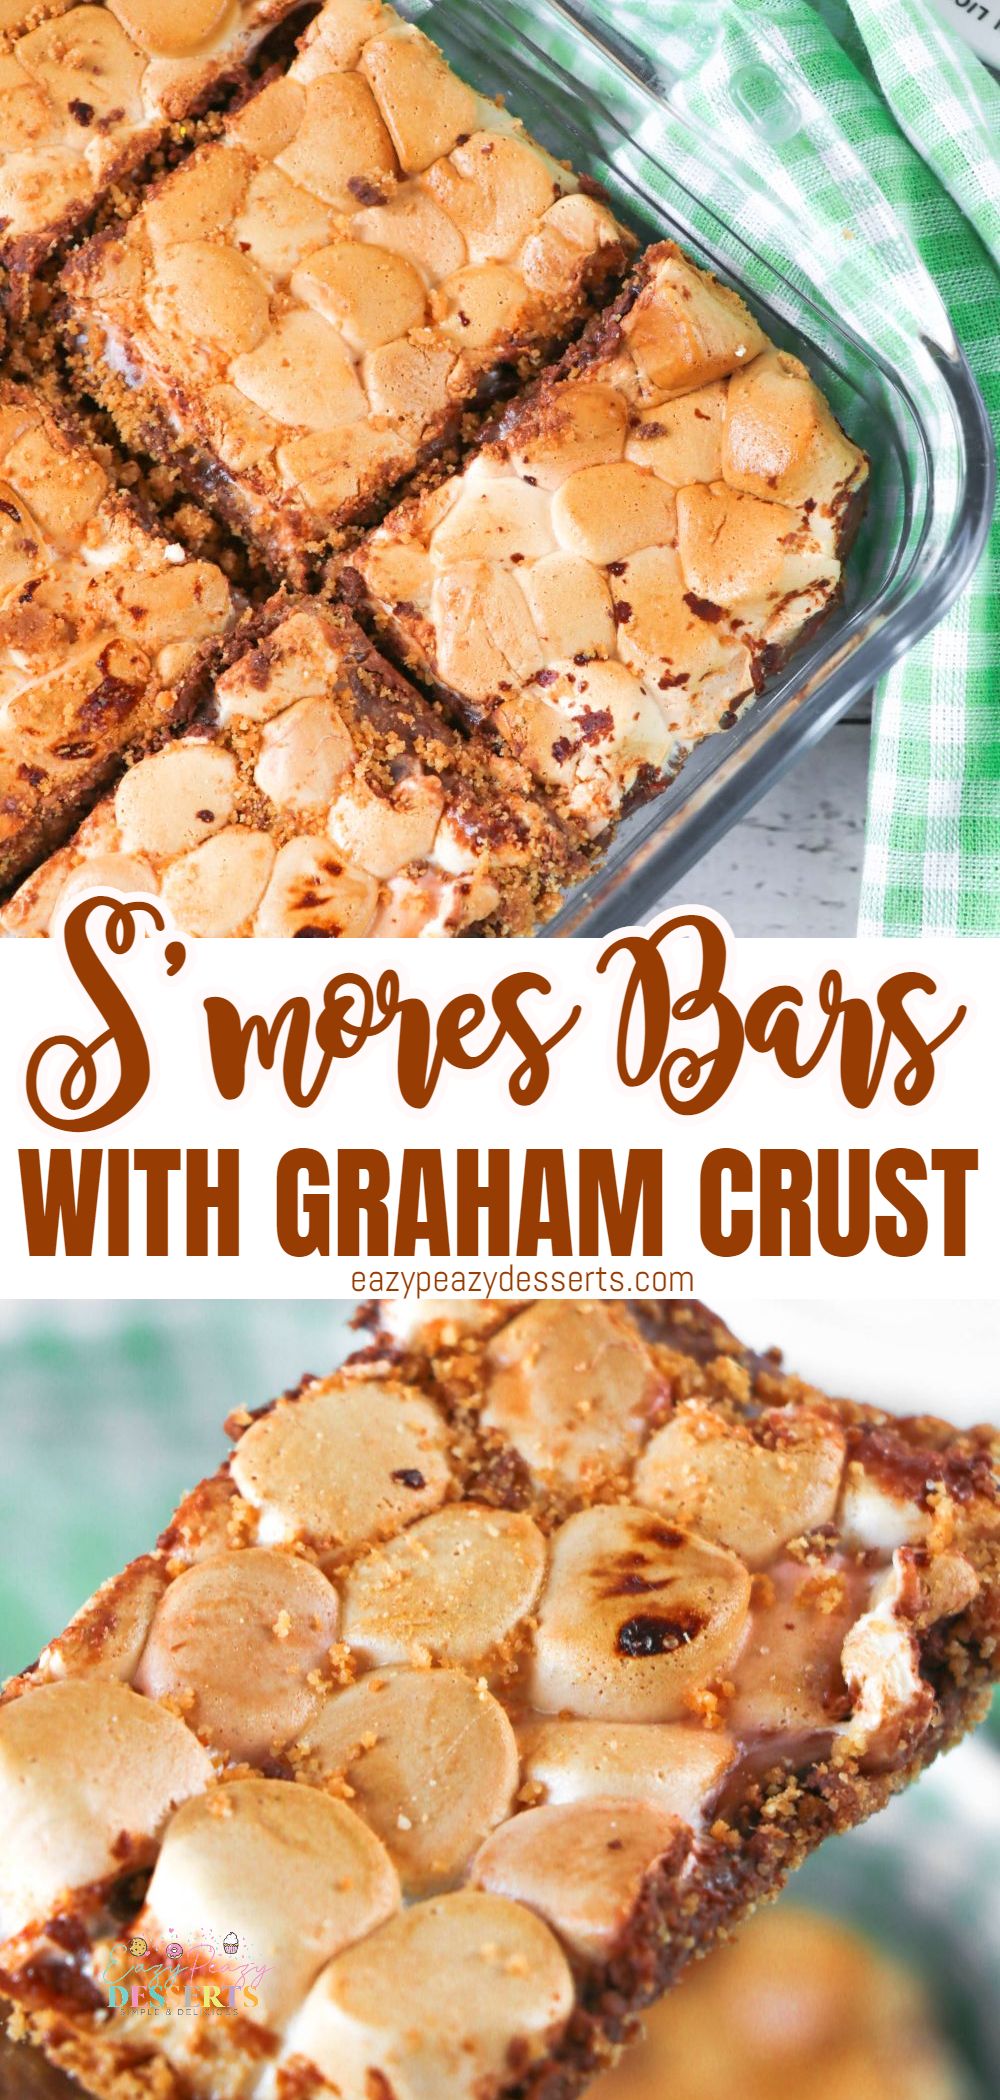 Photo collage of s'mores bars with chocolate and graham cracker crust